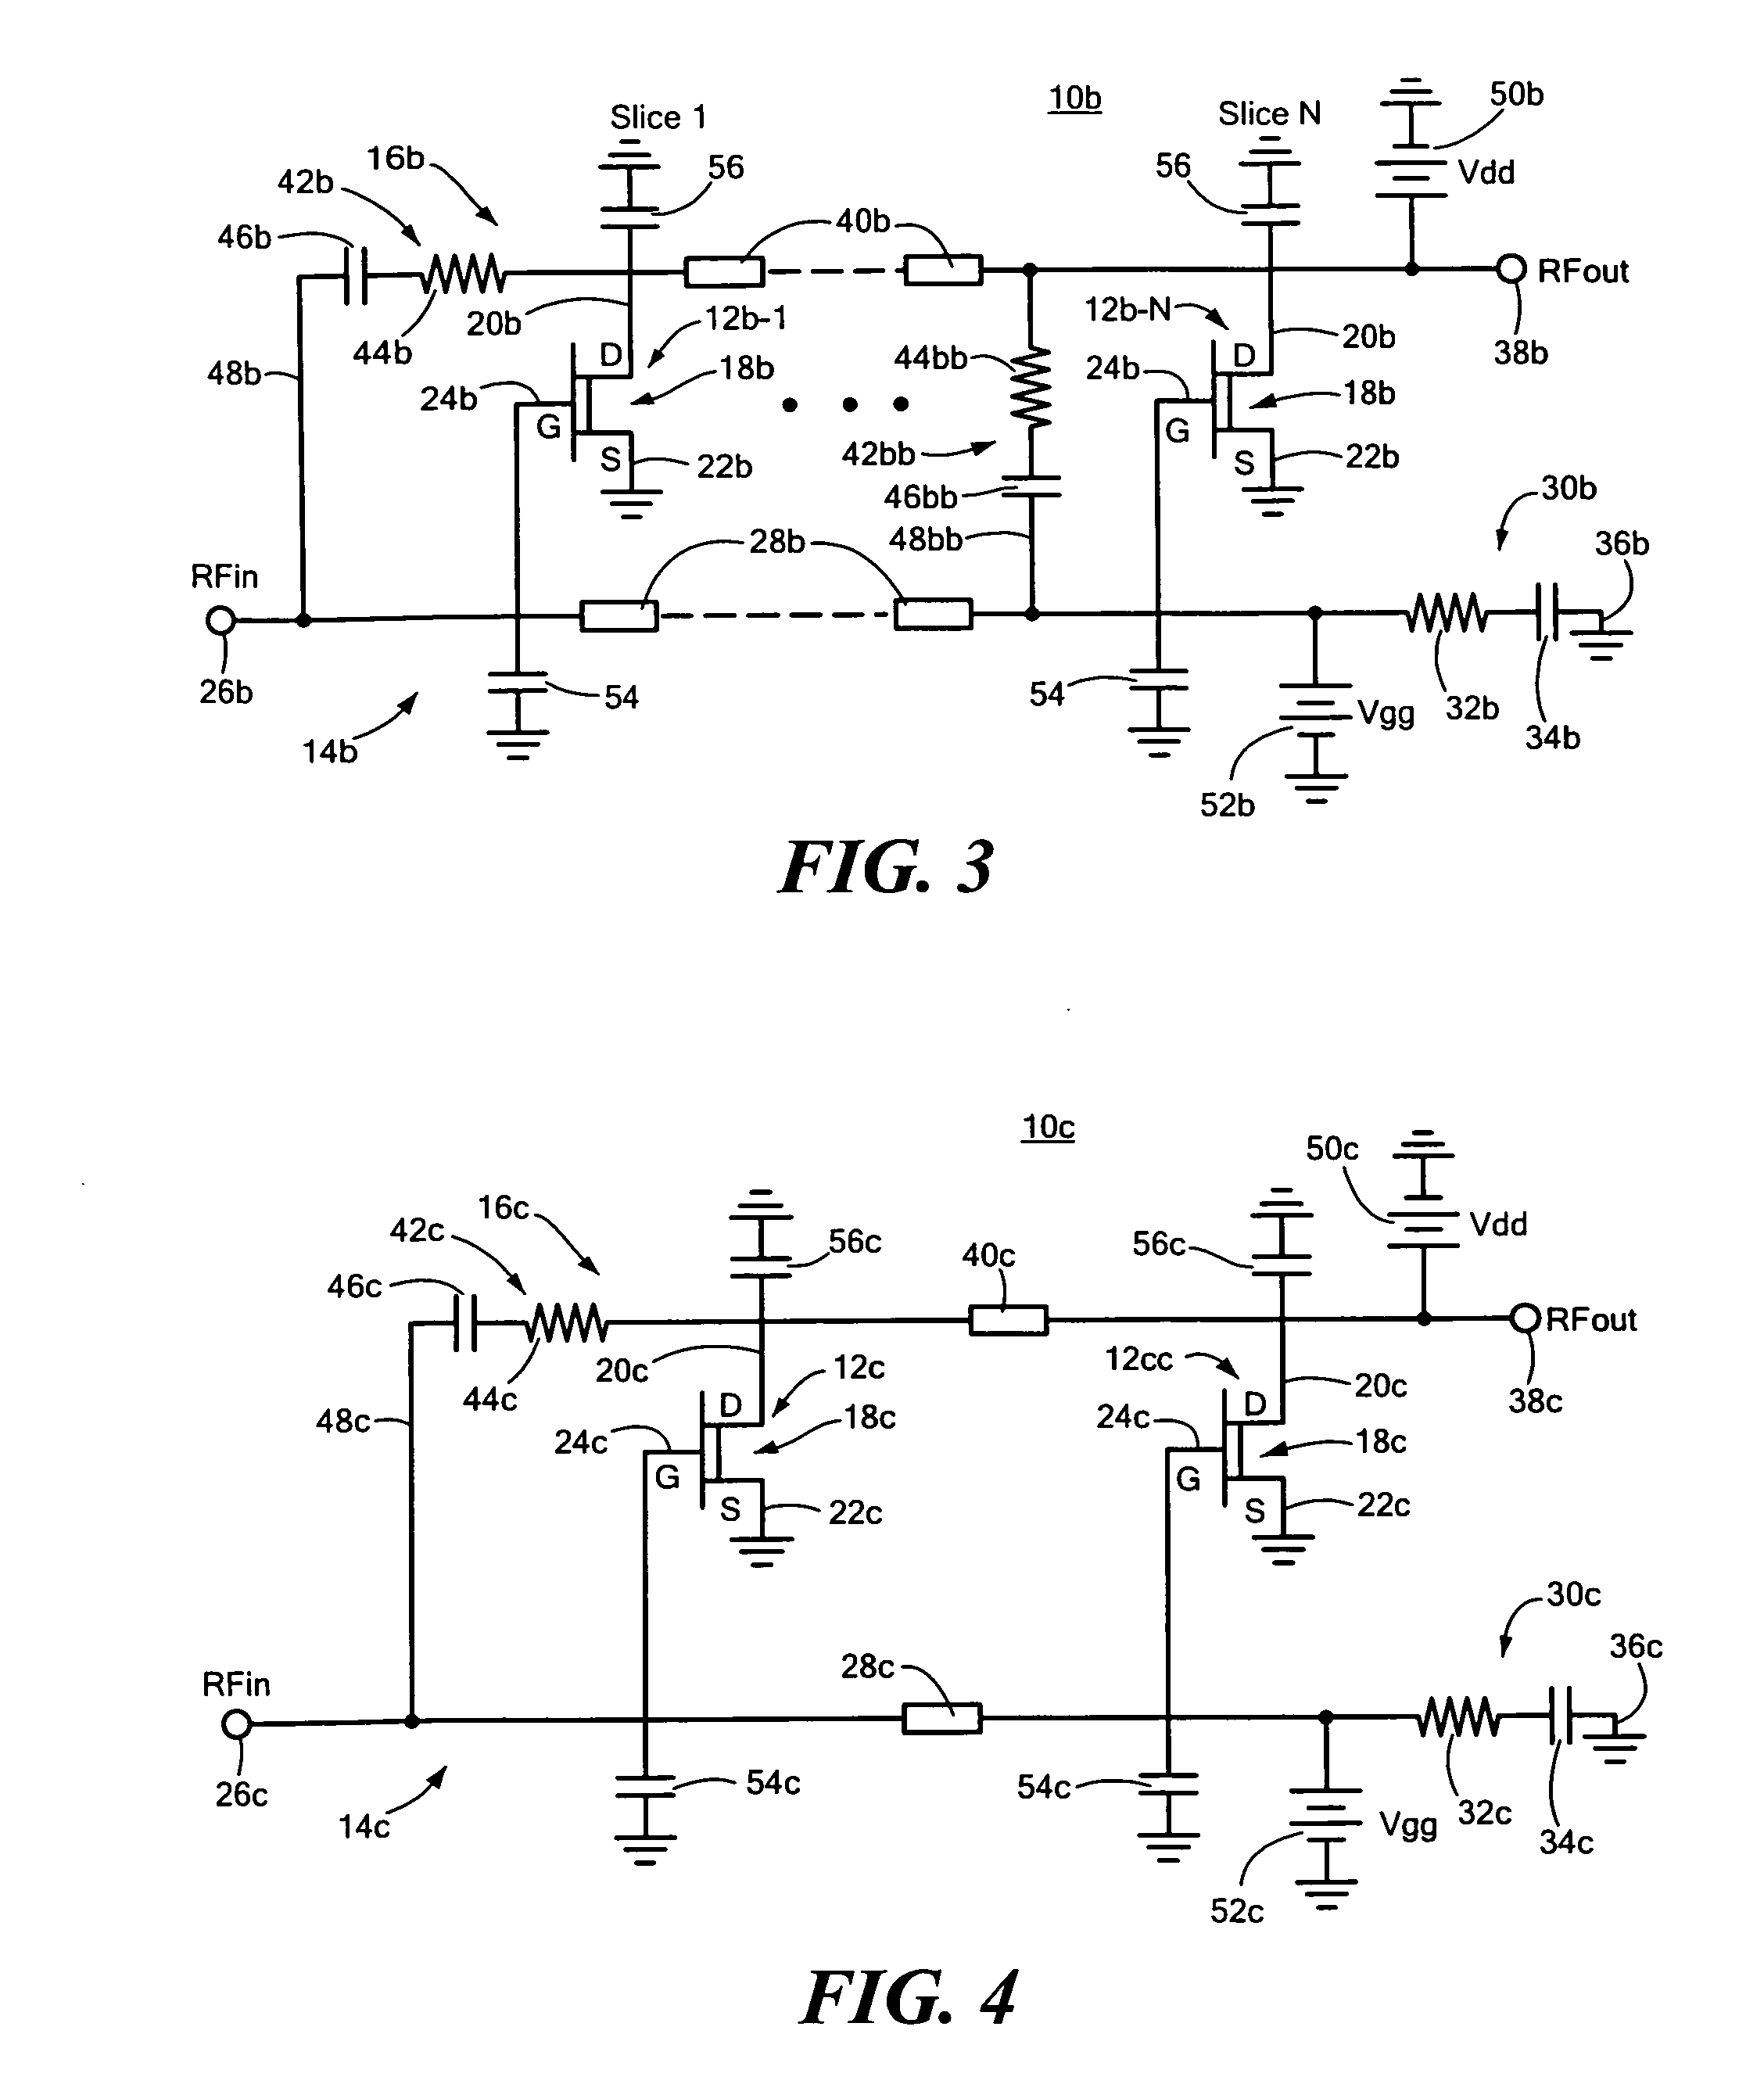 Modified distributed amplifier to improve low frequency efficiency and noise figure